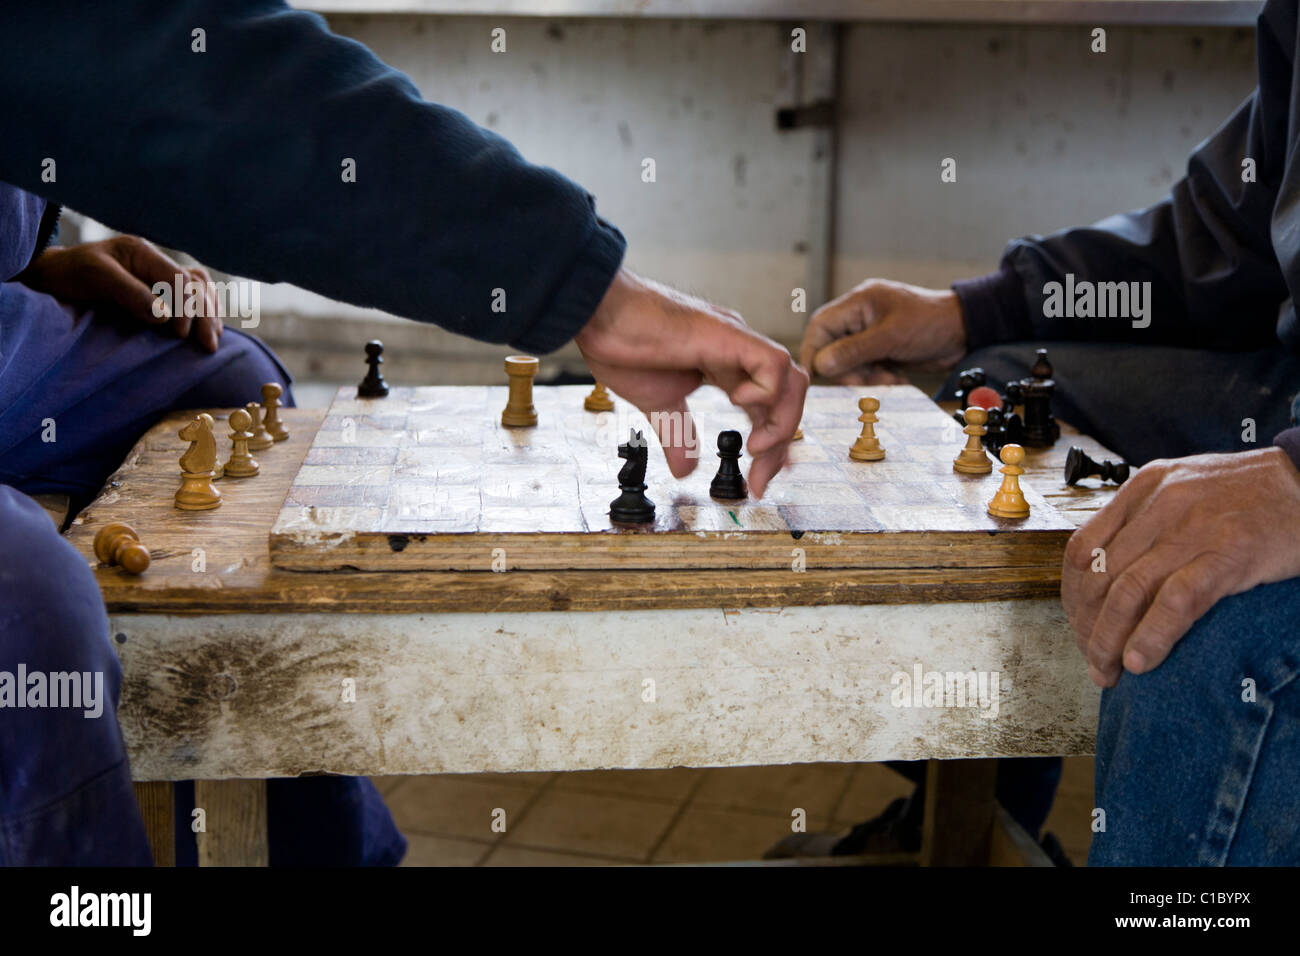 Fishermen playing 'Checkers' board game. Also called 'Draughts' board game. Fishermen´s huts, Narsaq, South Greenland Stock Photo